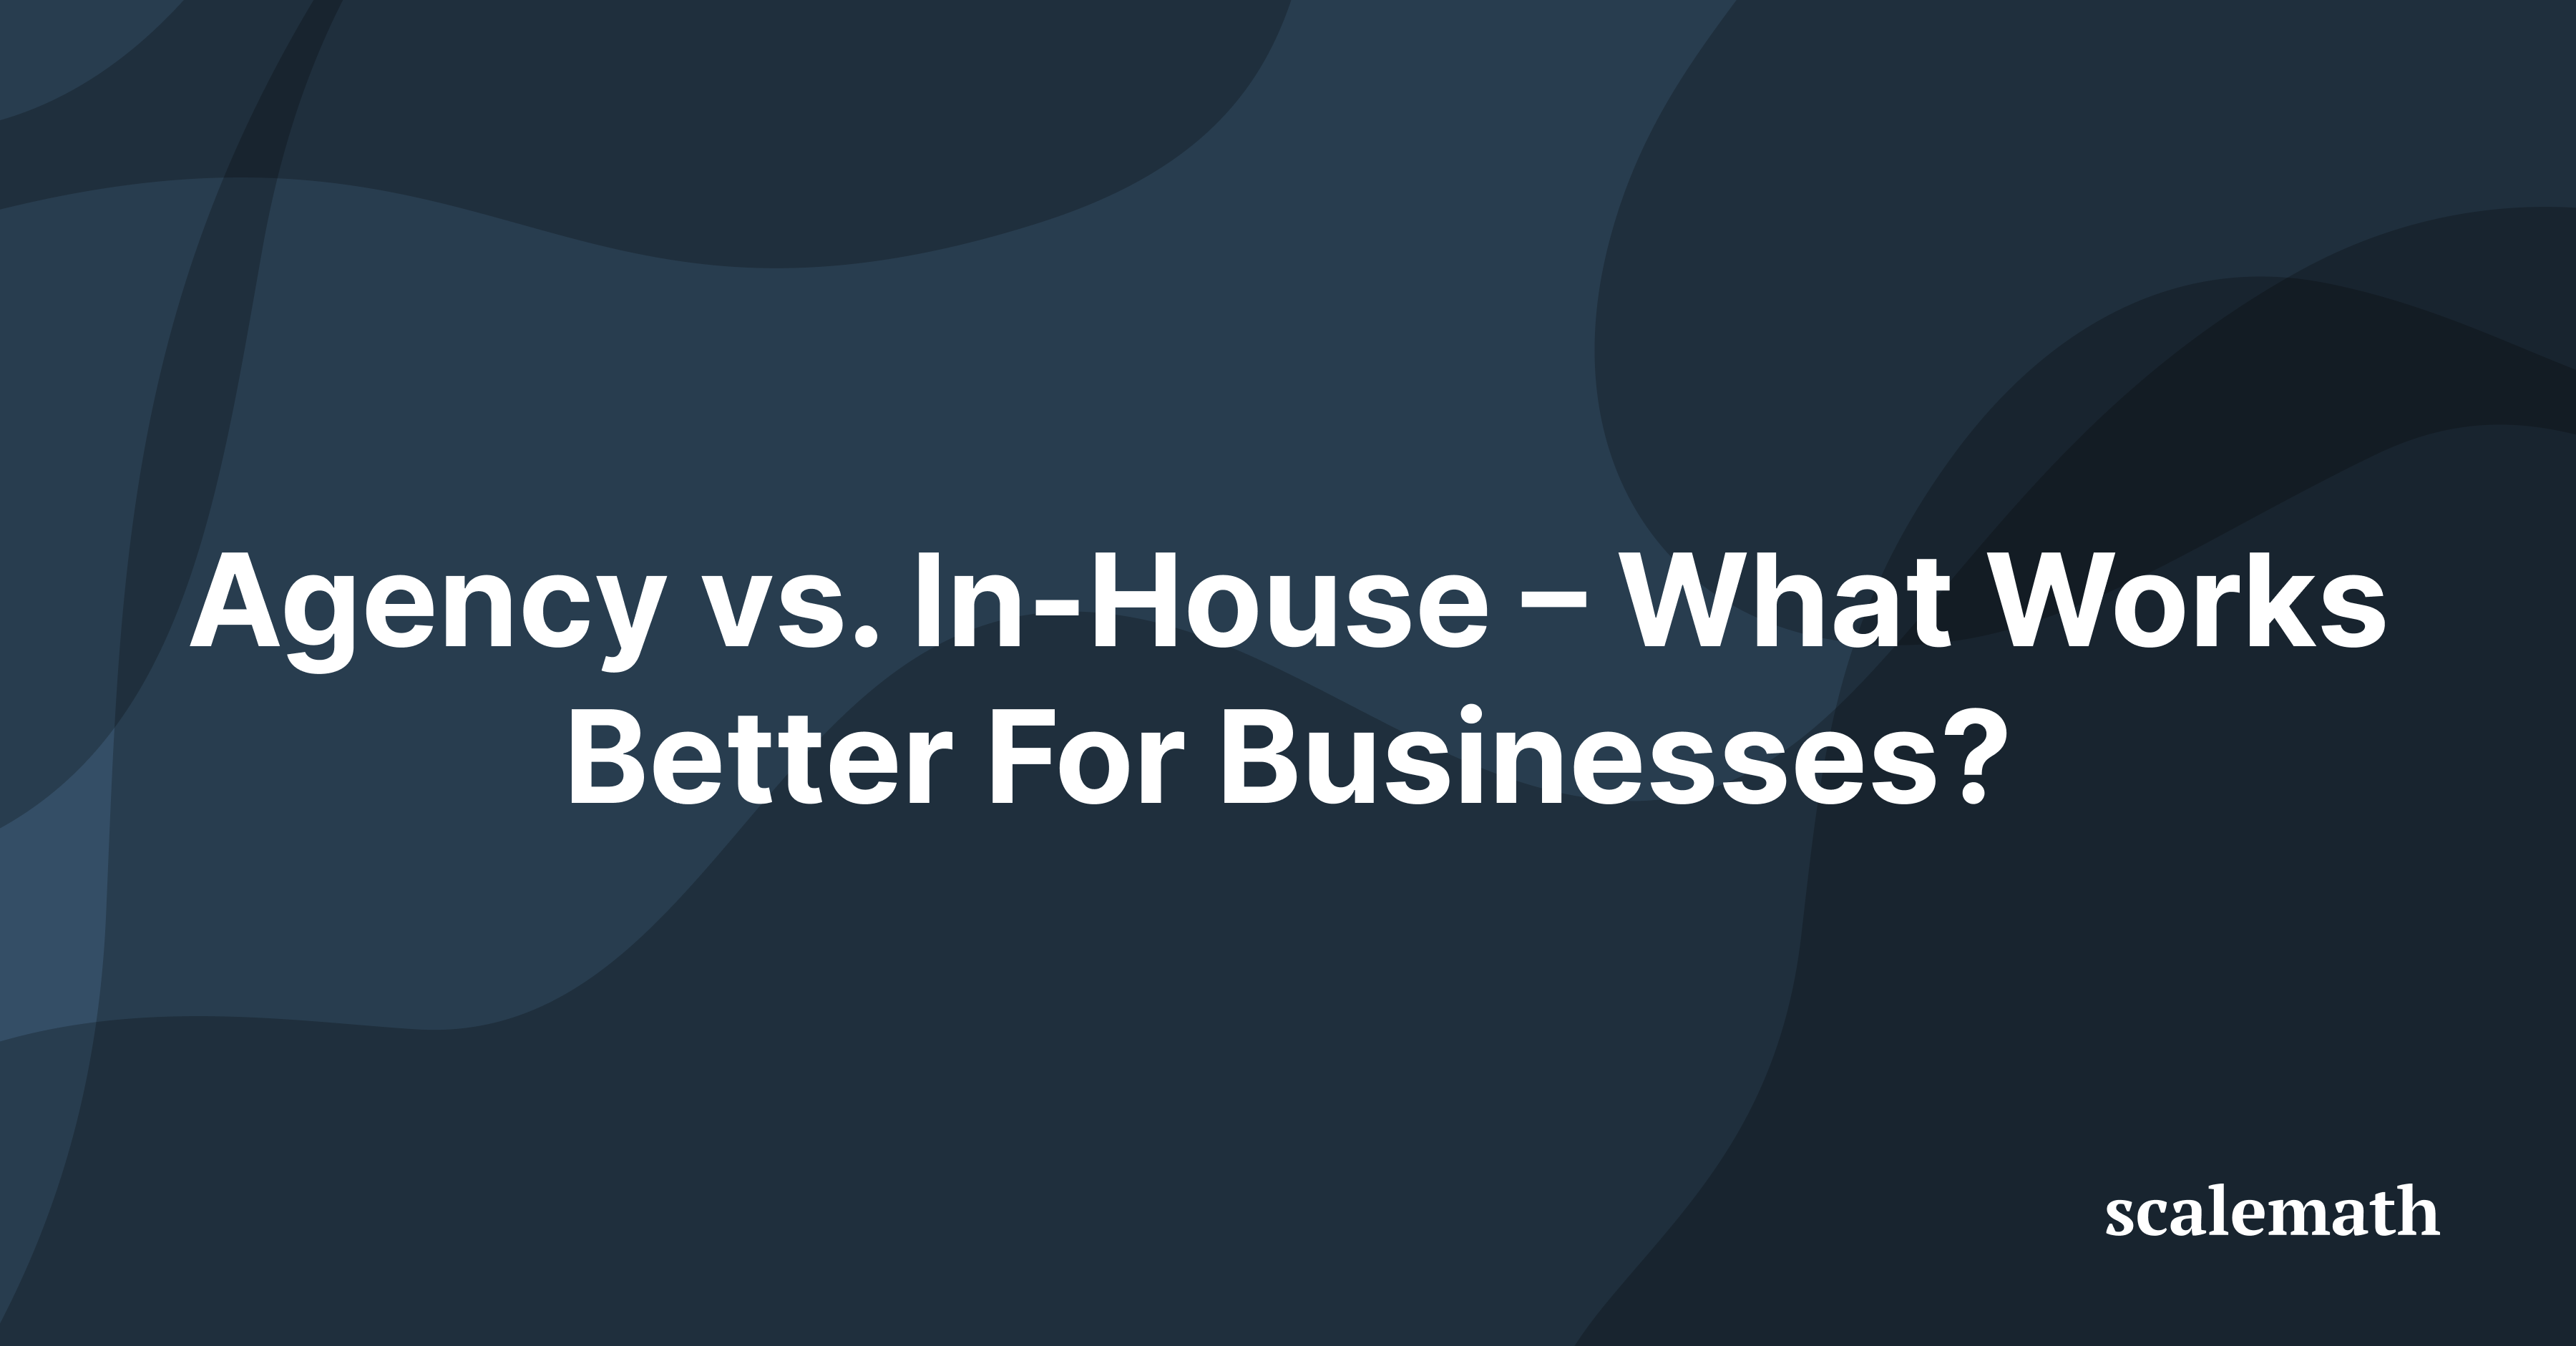 Agency vs. In-House – What Works Better For Businesses?